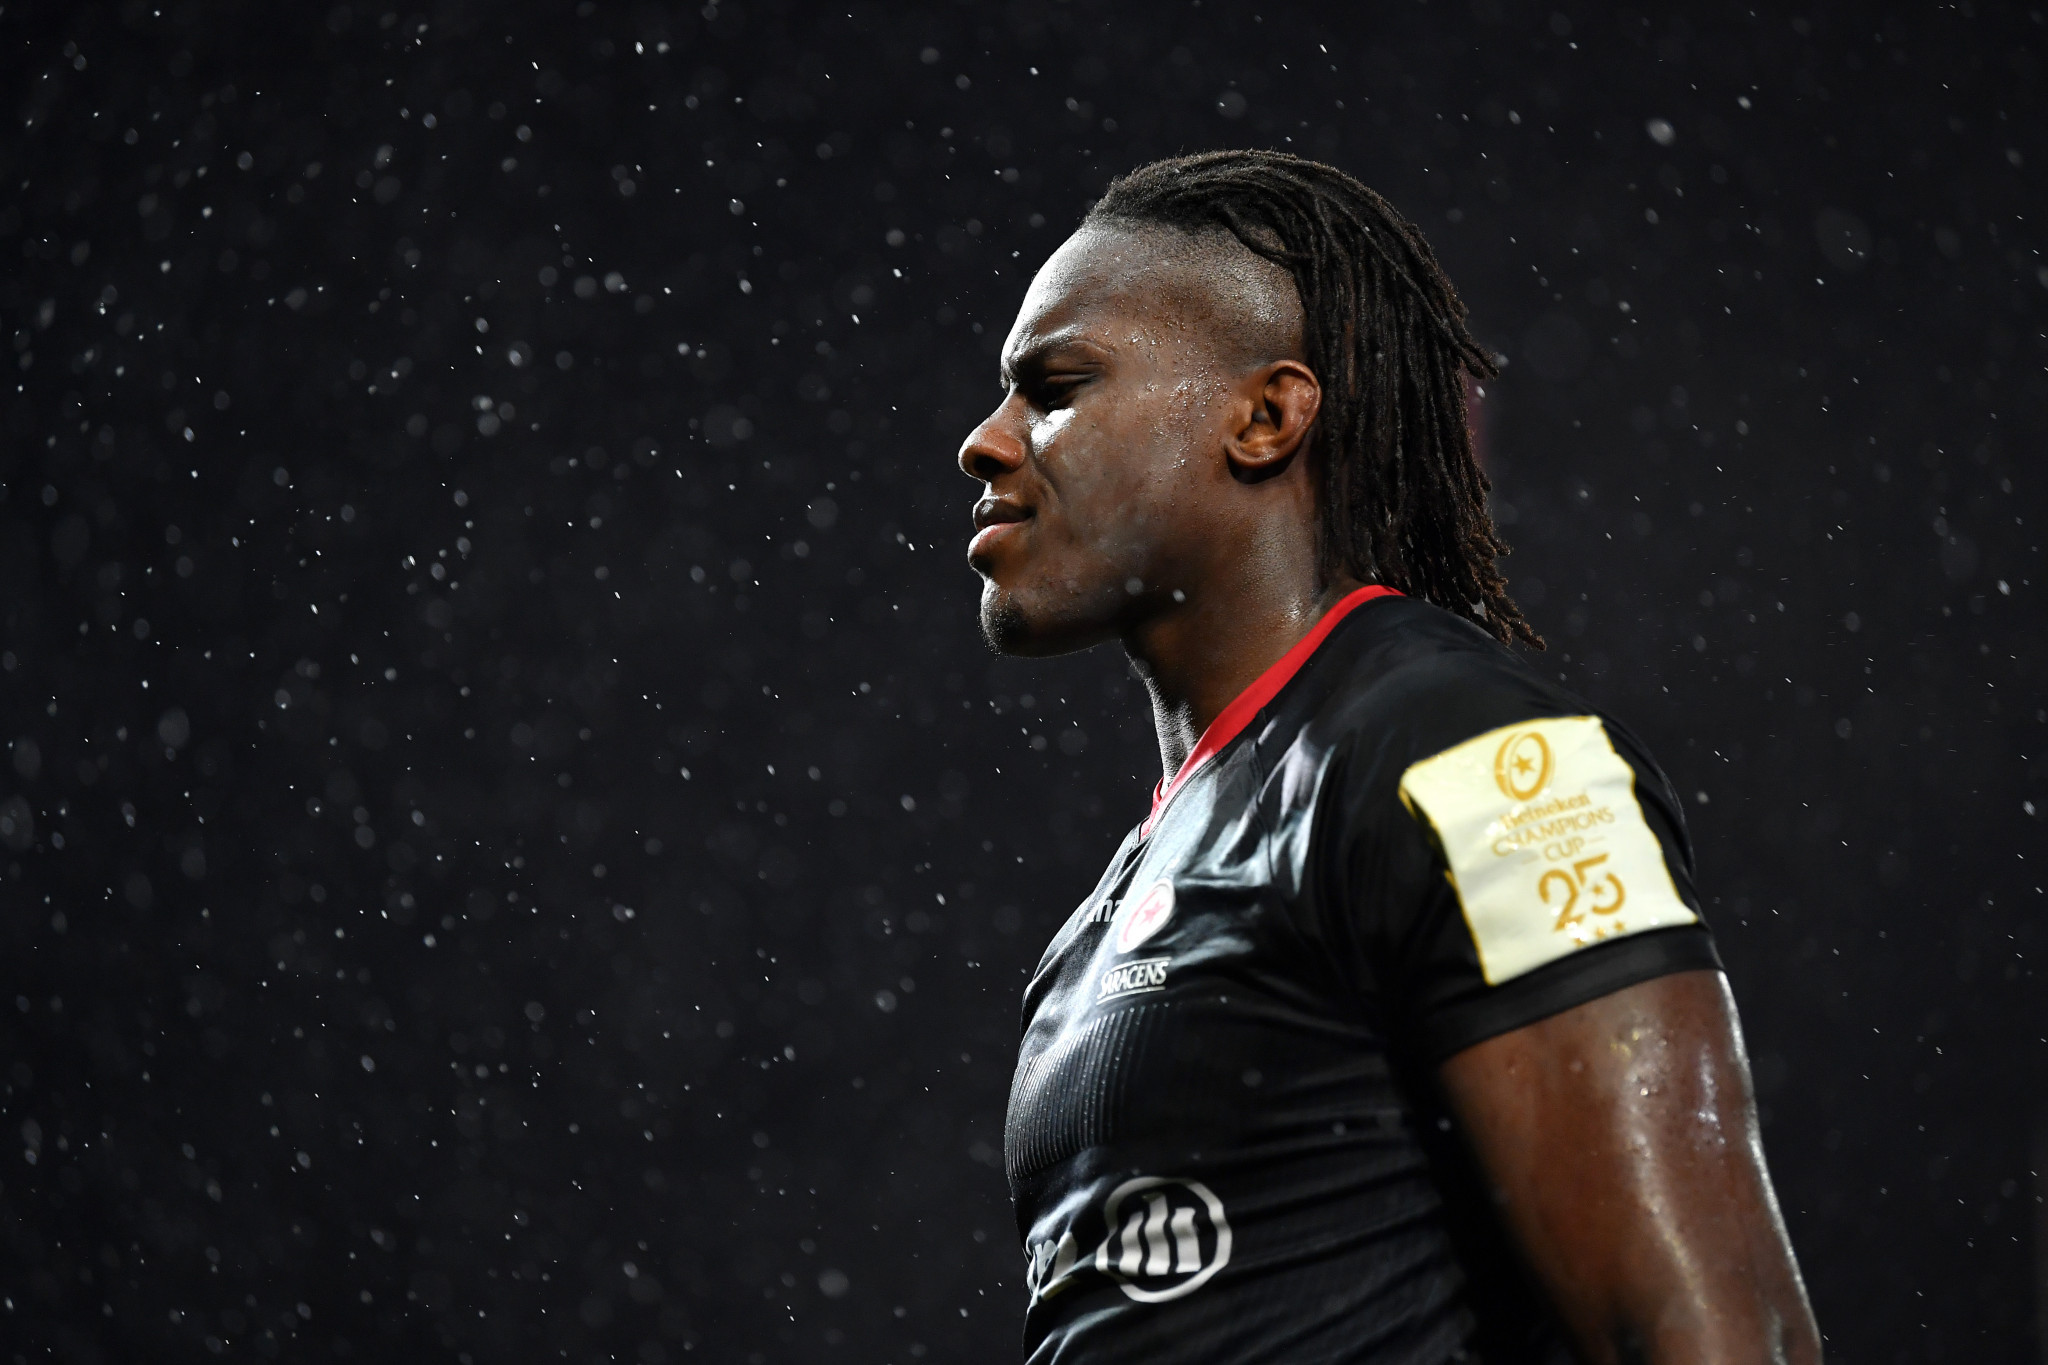 Maro Itoje is among the England stars who could be playing in the second division next season ©Getty Images